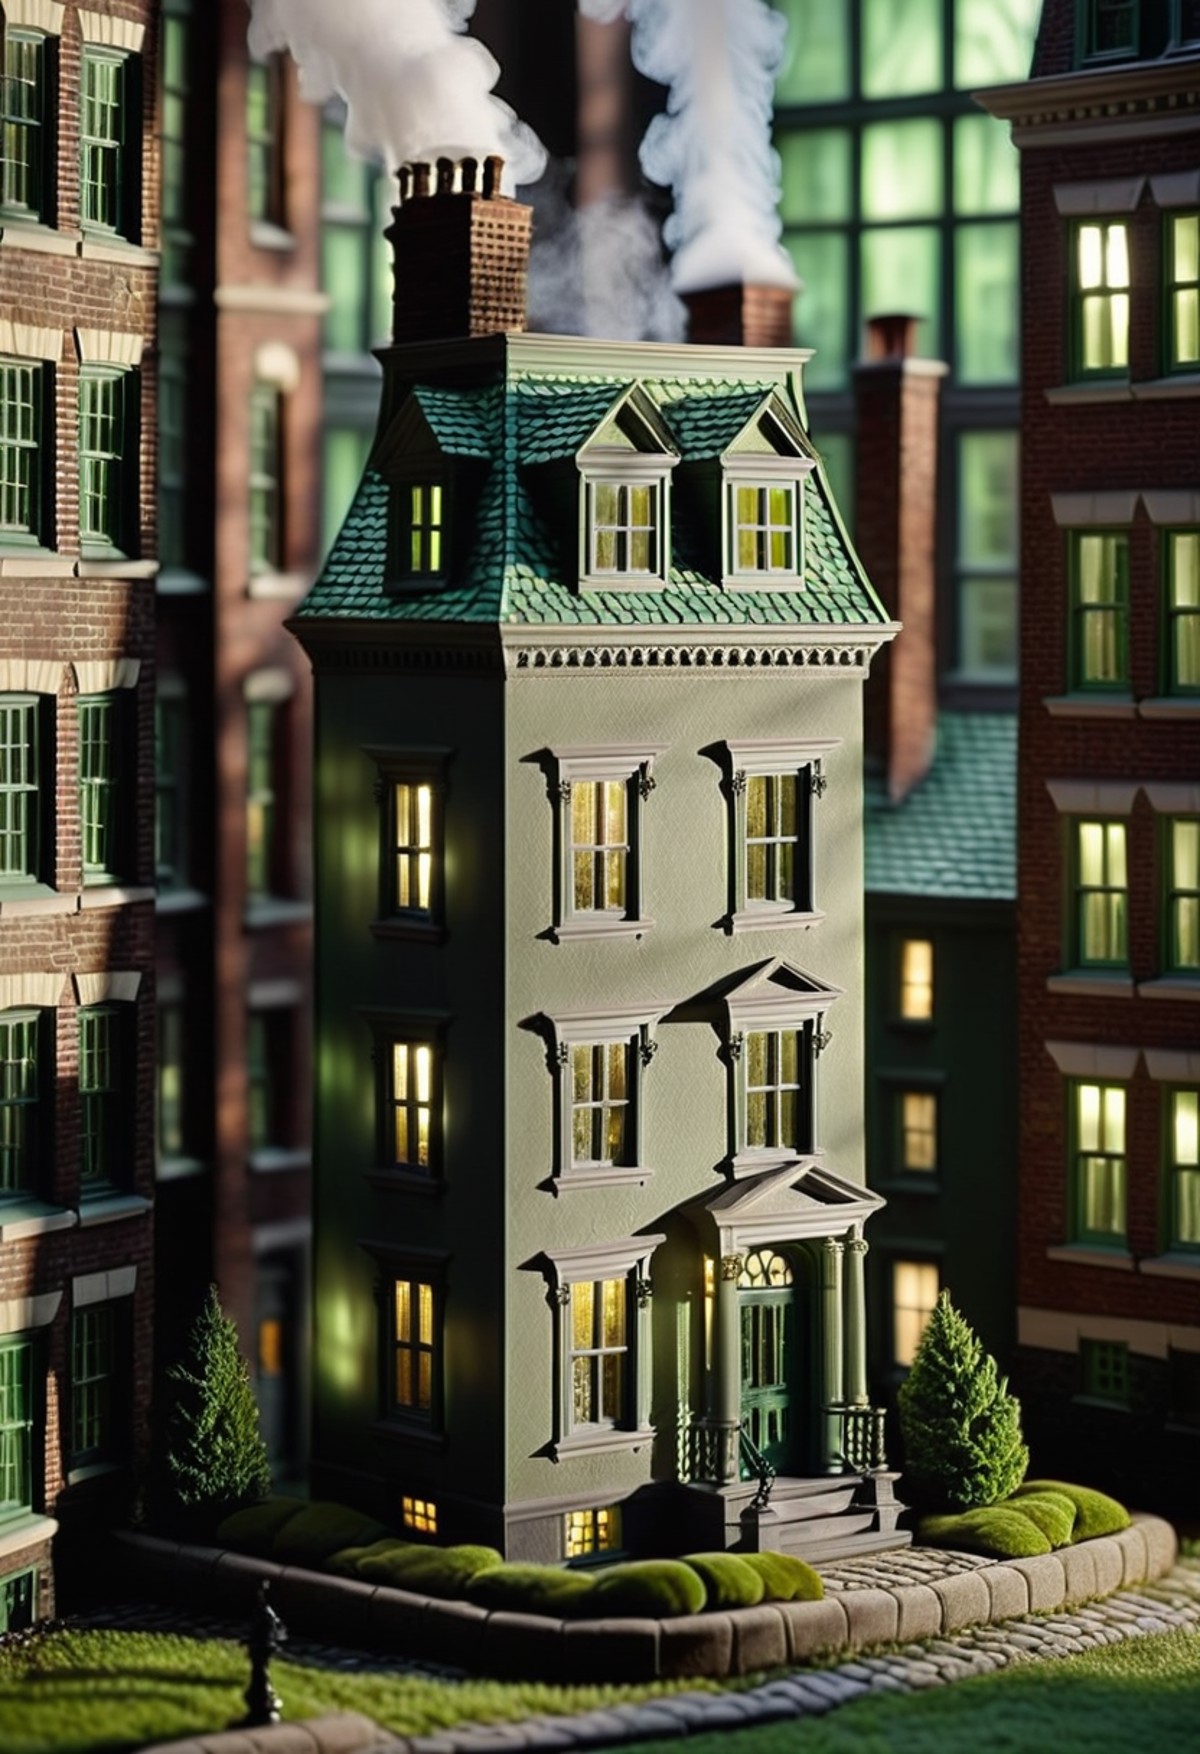 cinematic photo in a surreal world, a miniature of a house enters the heart of a humble boston houses. The facade of the h...